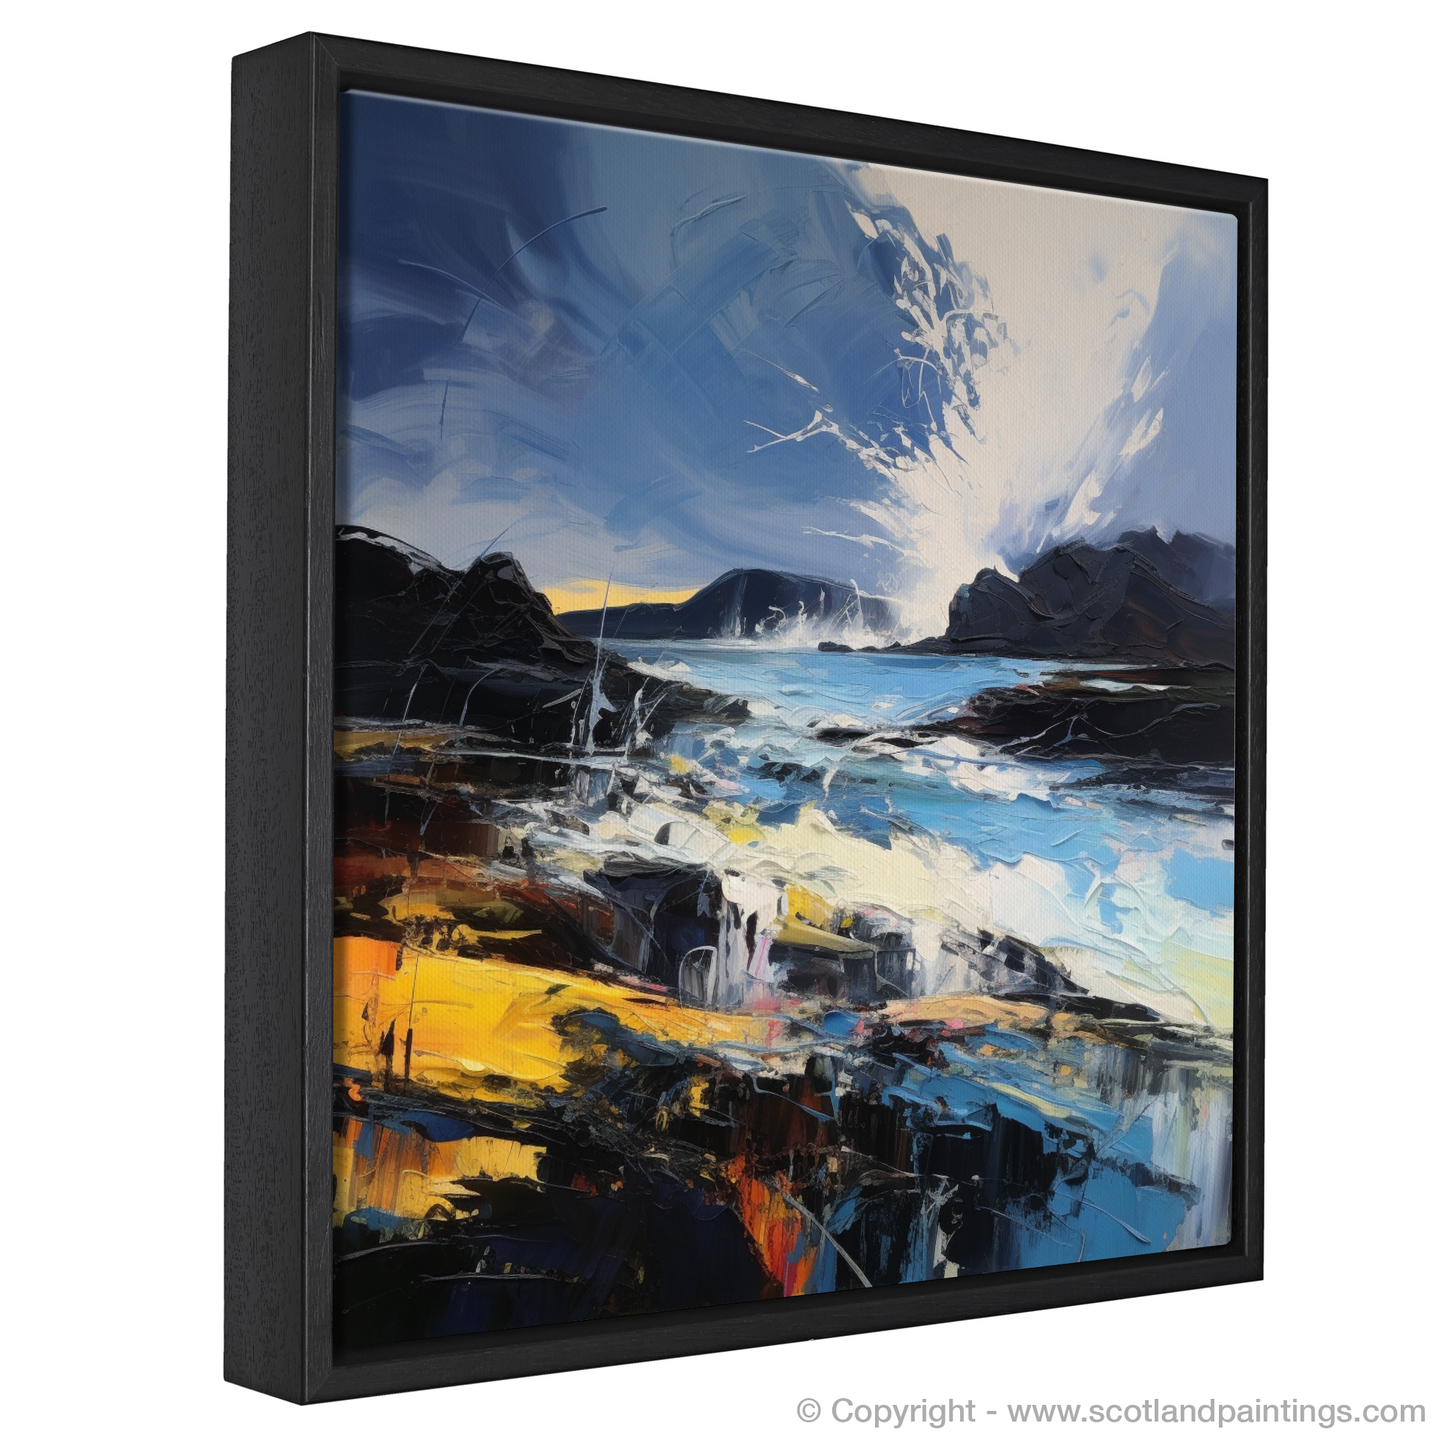 Painting and Art Print of Ardalanish Bay with a stormy sky entitled "Storm's Embrace at Ardalanish Bay".